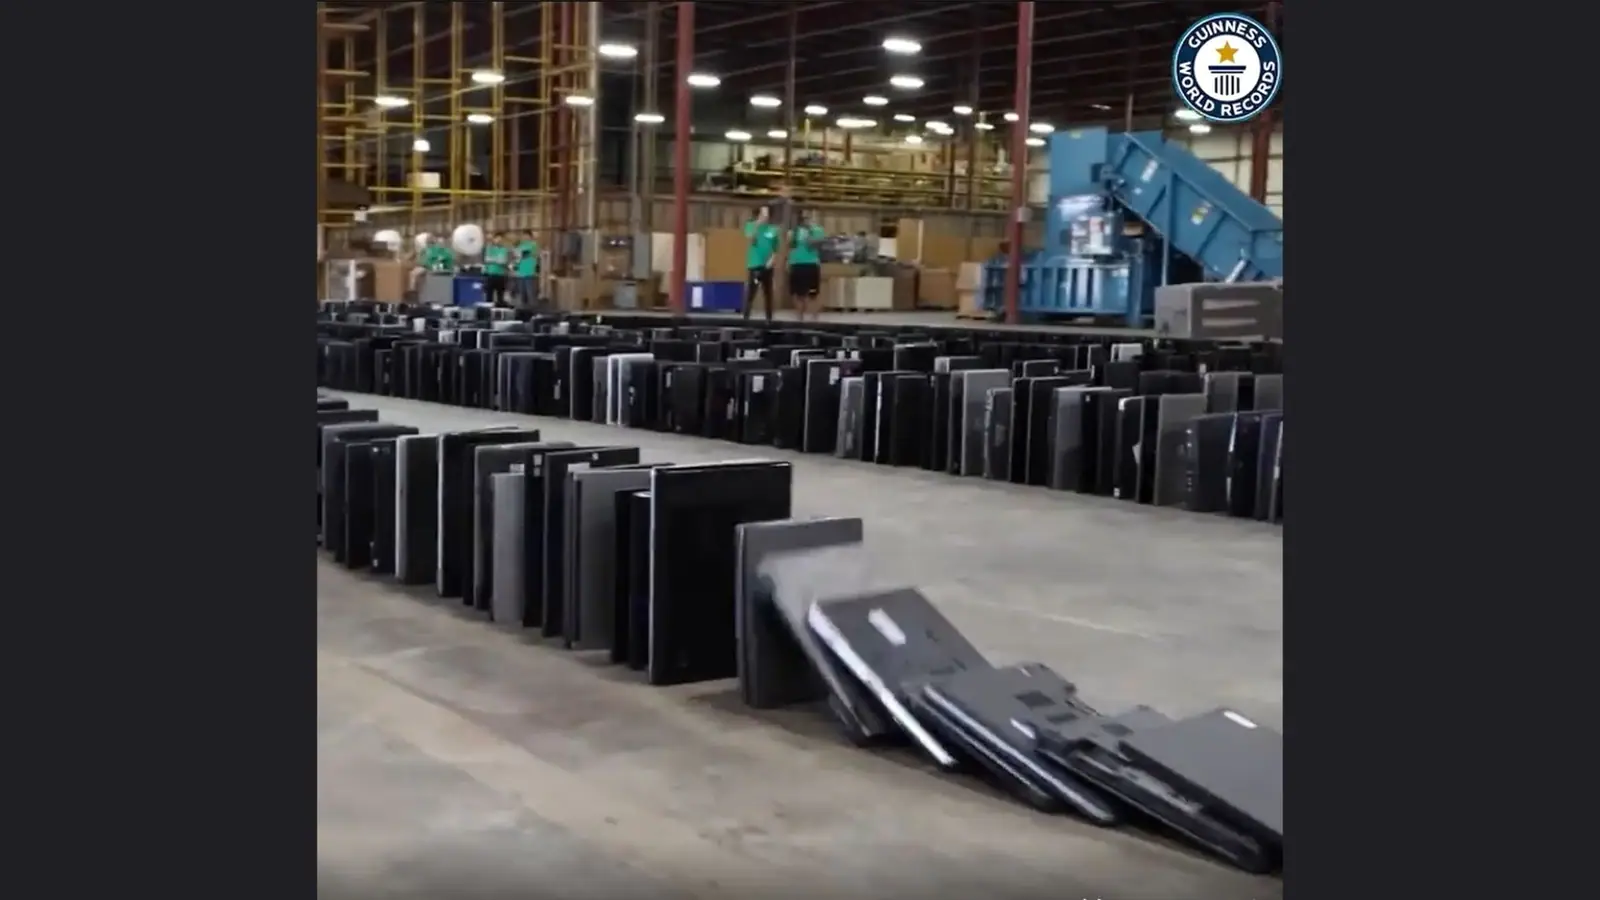 Technology Recyclers topples 2,190 laptops in domino fashion, sets world record | Trending